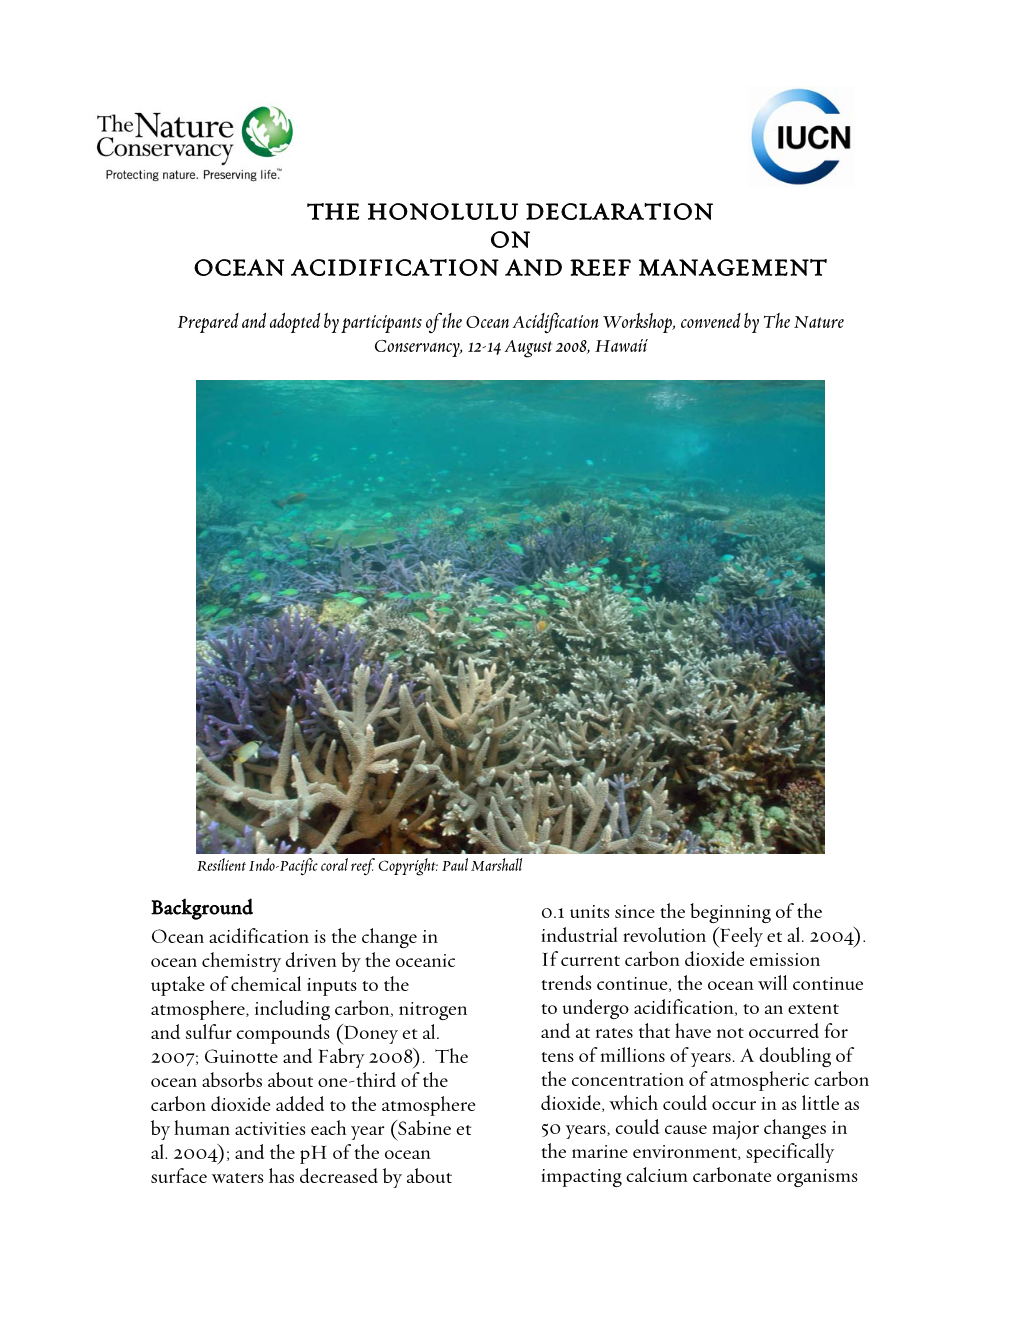 The Honolulu Declaration on Ocean Acidification and Reef Management